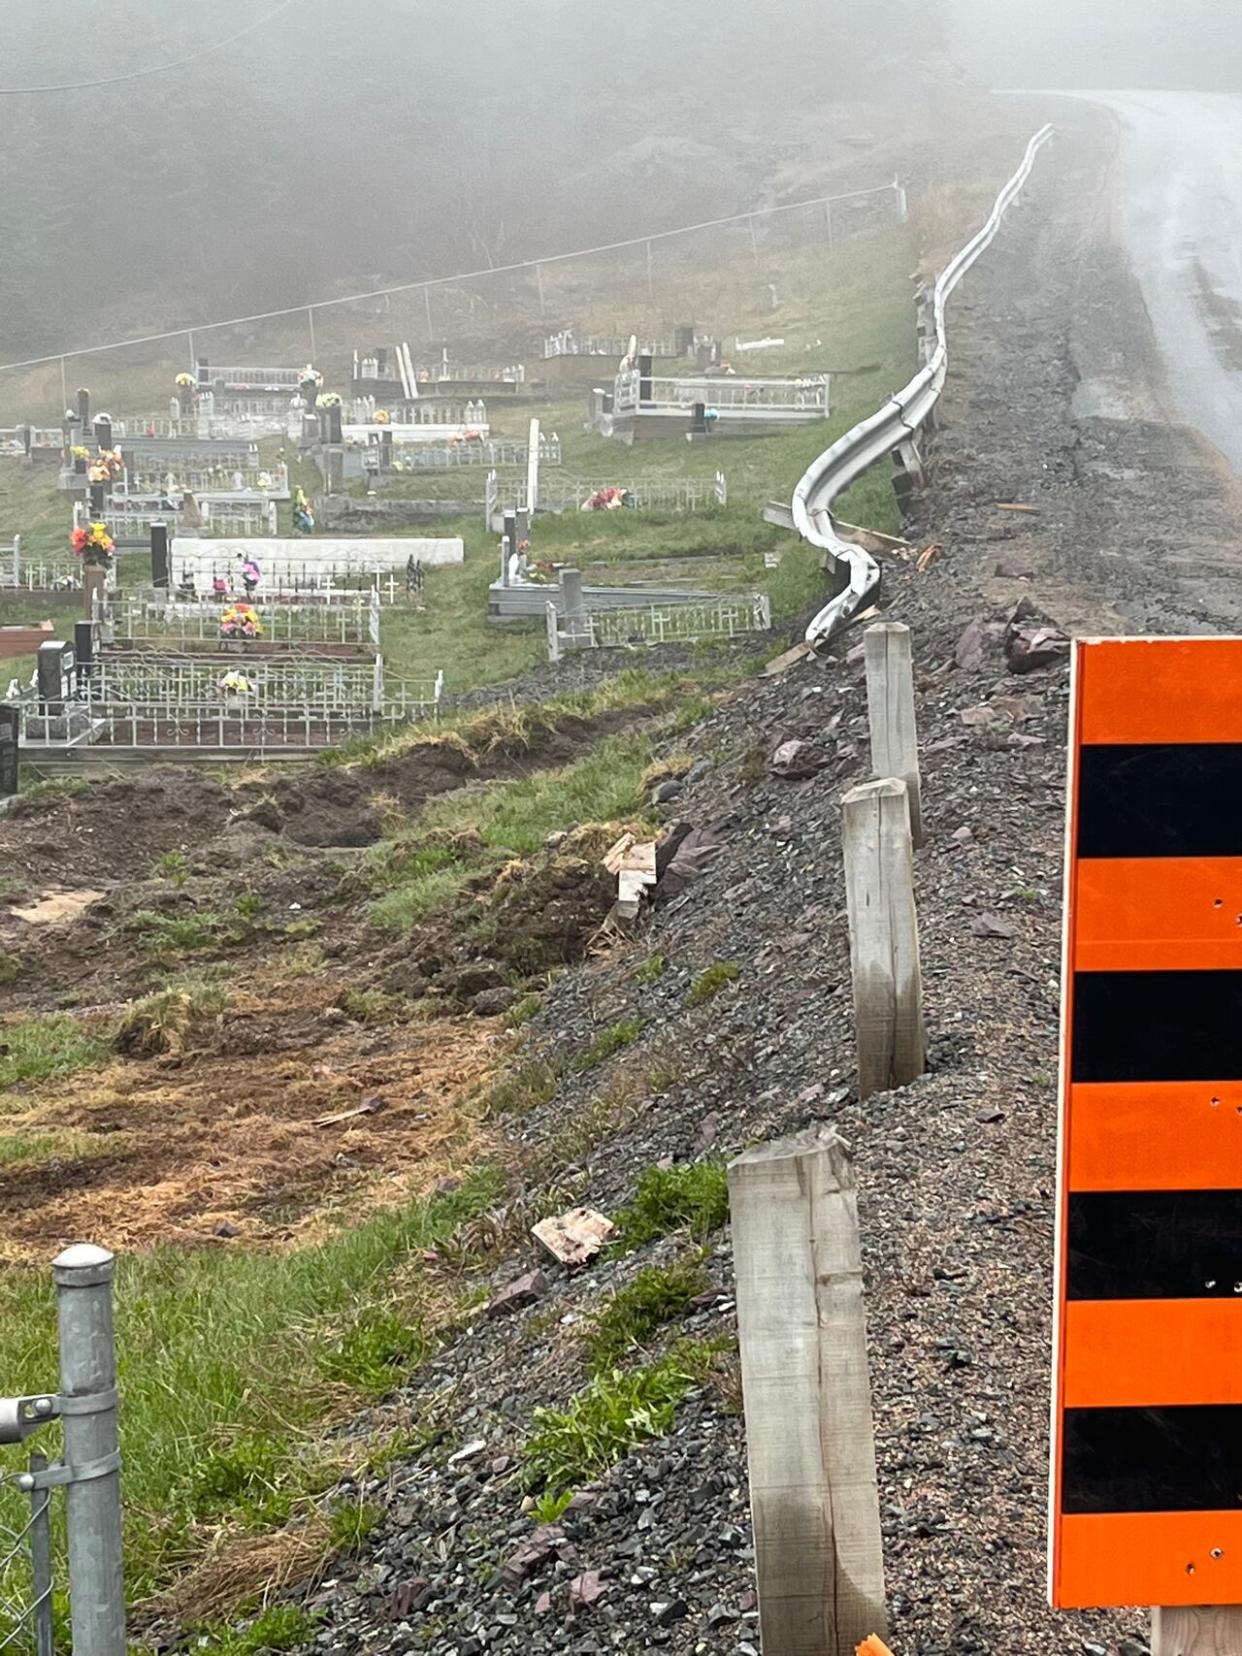 In February a government plough went off the road in Gooseberry Cove, damaging the guard rail, cemetery and its retaining wall.  (Submitted by Ashley Politi - image credit)